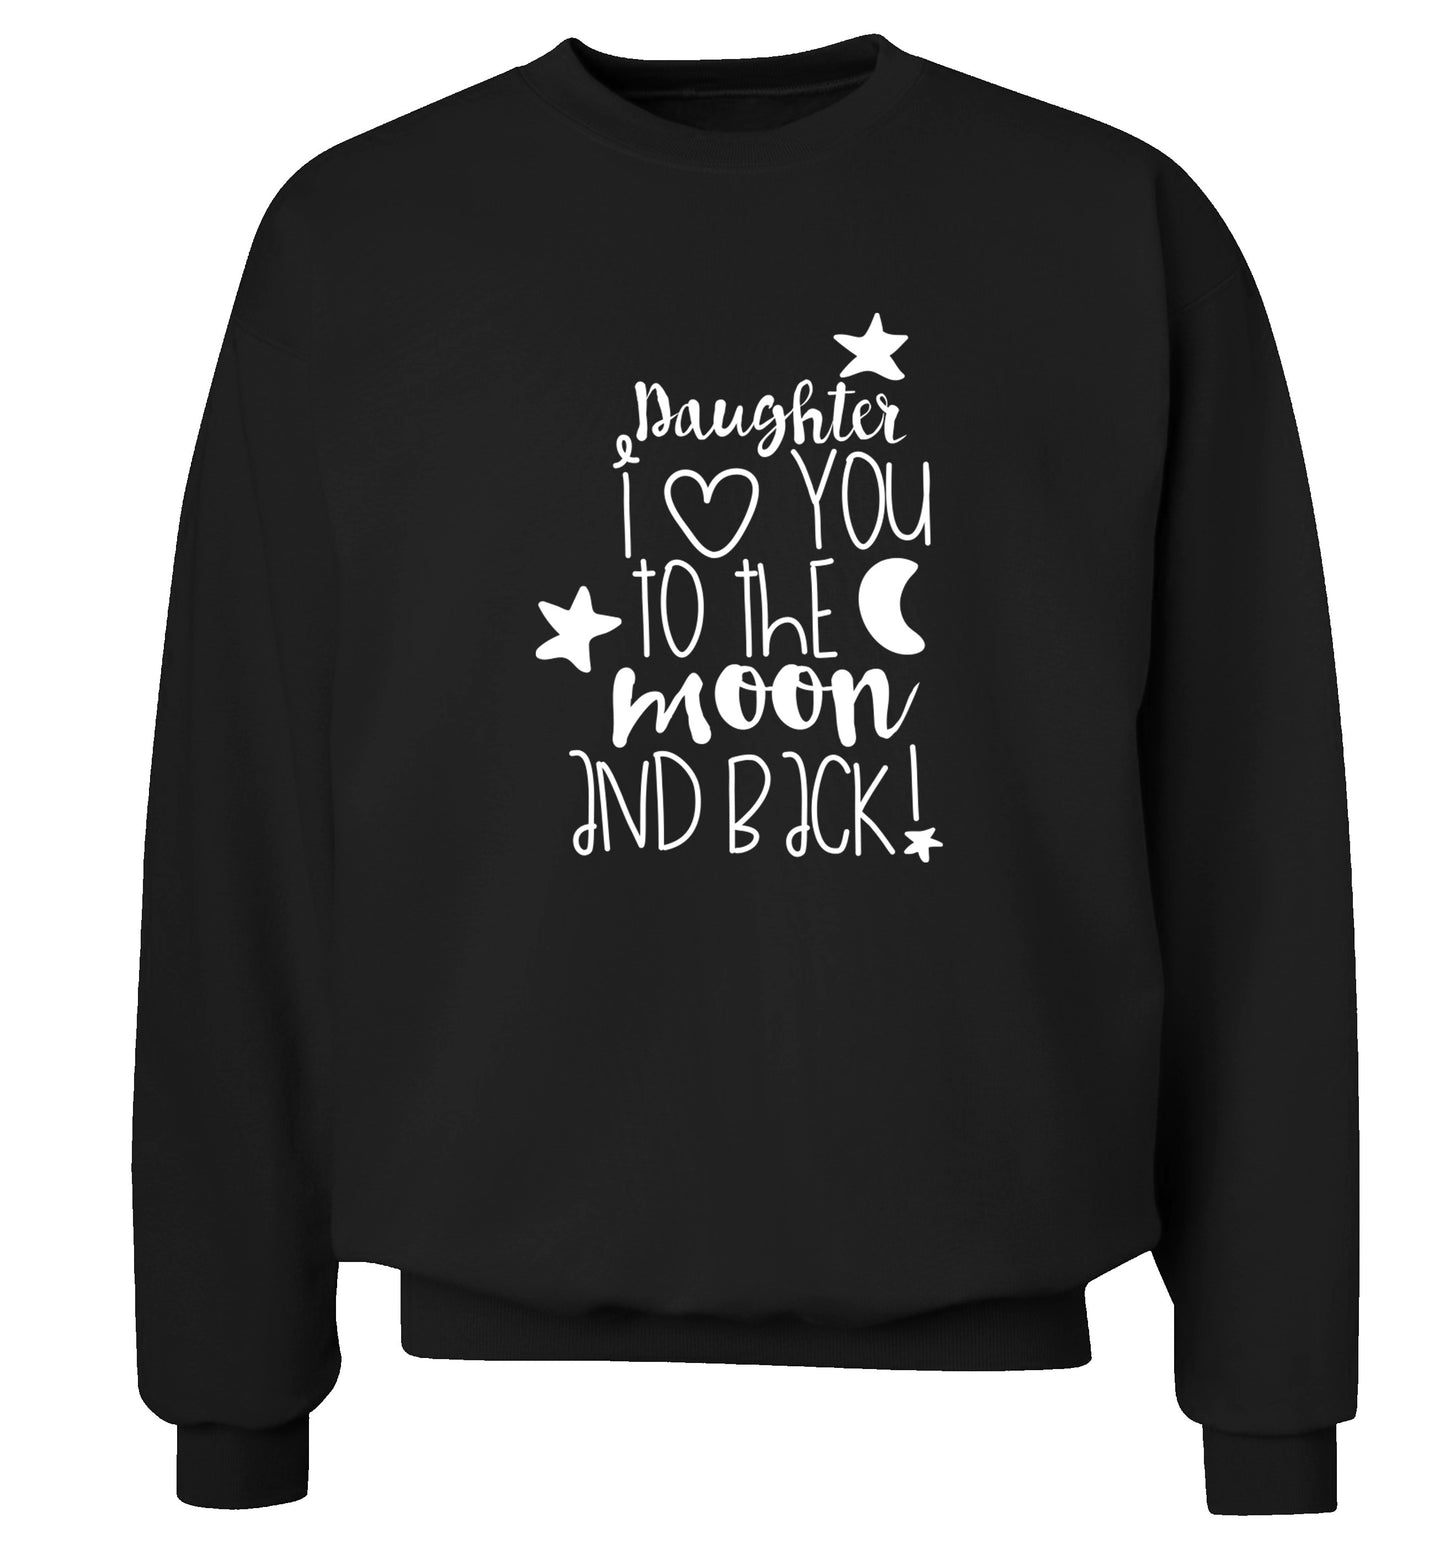 Daughter I love you to the moon and back Adult's unisex black  sweater 2XL